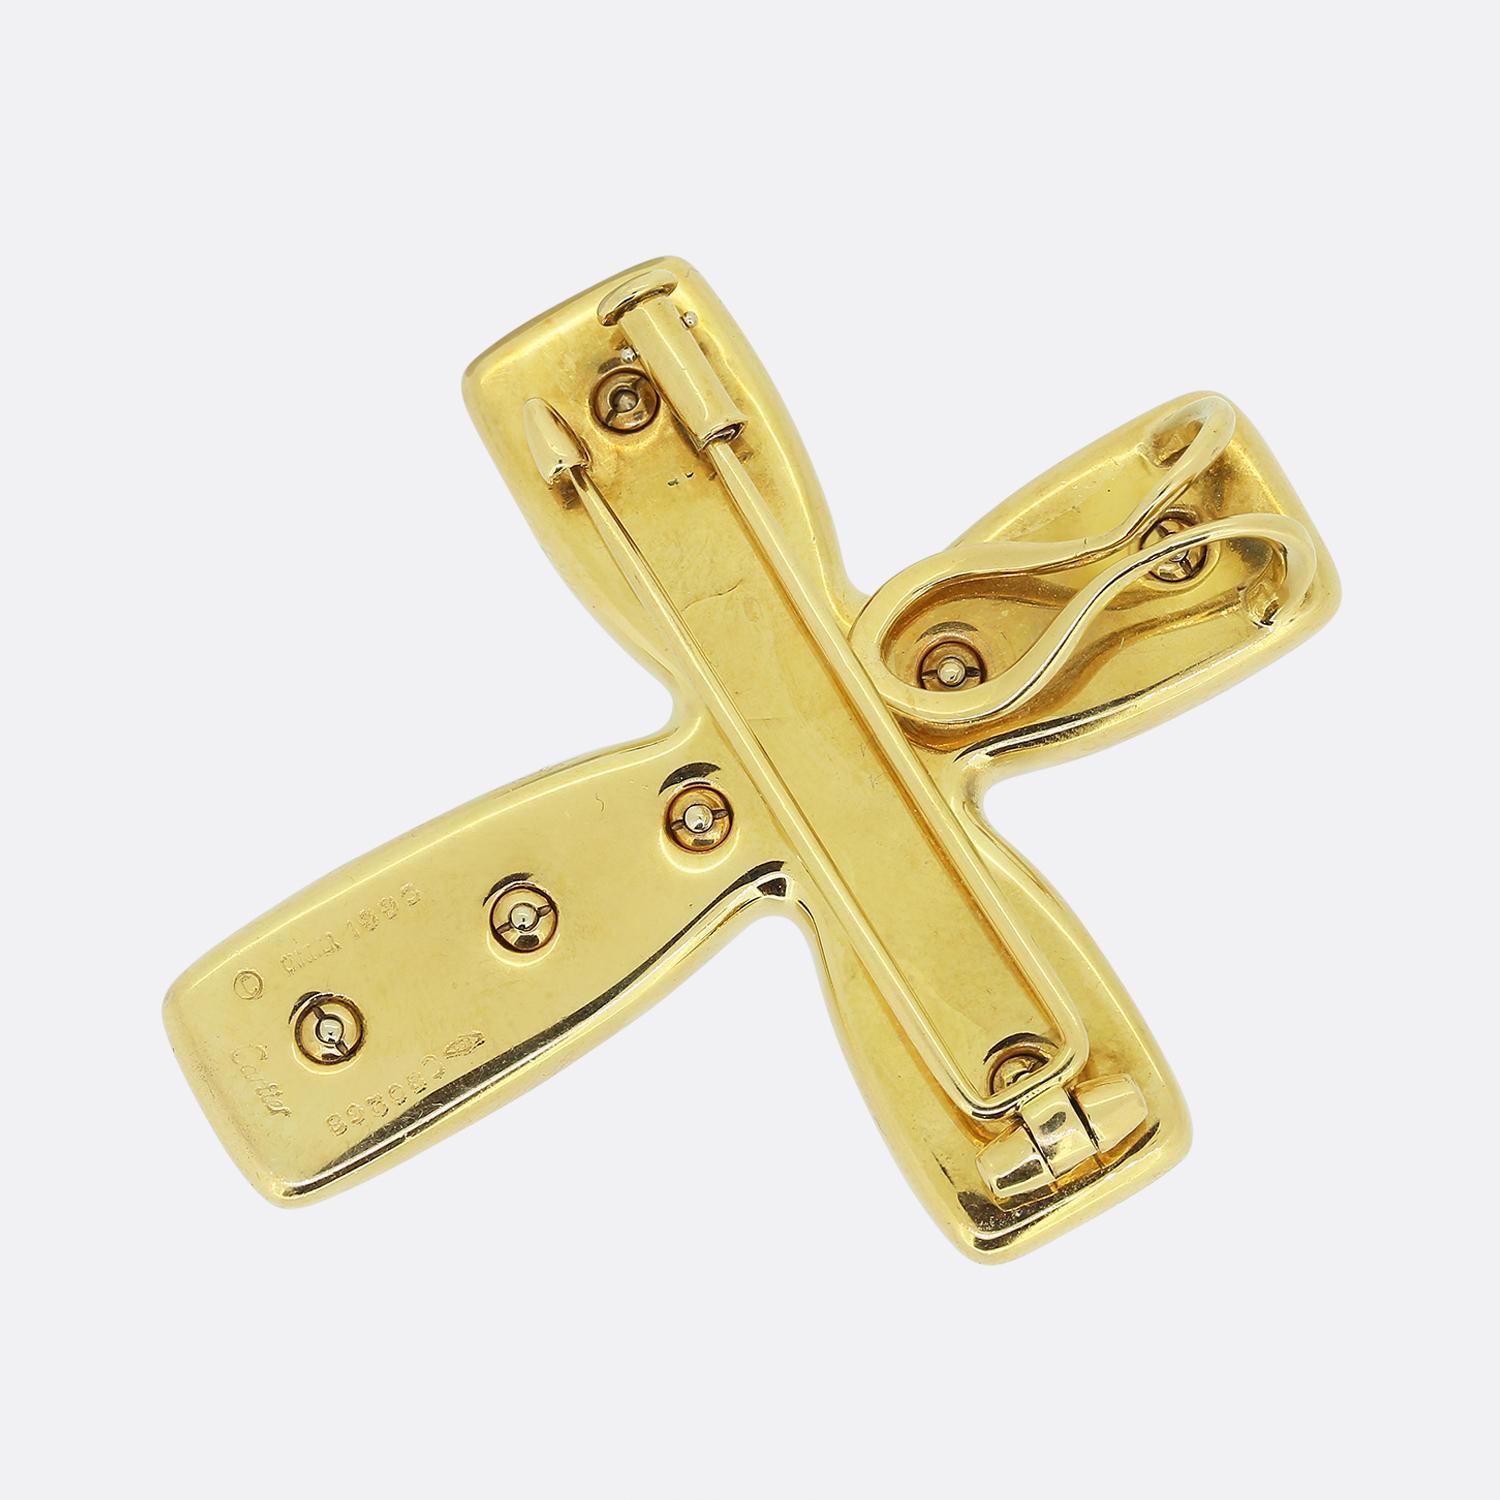 Here we have a stunning piece from the world renowned luxury jewellery house of Cartier. This chic brooch/pendant has been crafted from a rich 18ct yellow gold into the shape of a Byzantine cross and decorated with a vast array of colourful